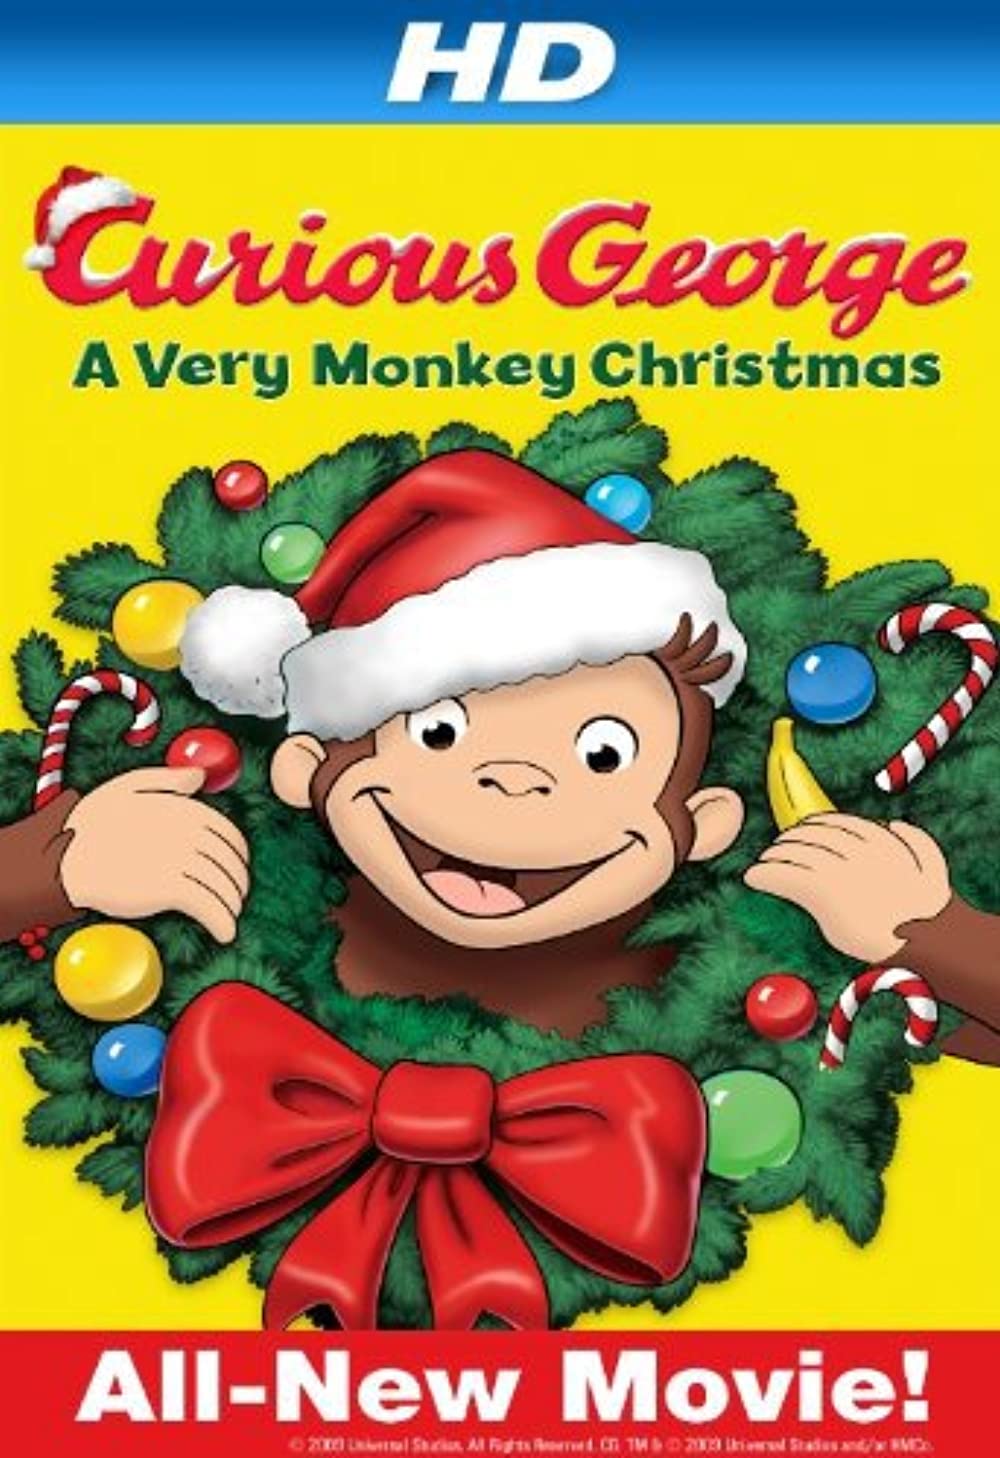 Download Curious George: A Very Monkey Christmas Movie | Watch Curious George: A Very Monkey Christmas Movie Review